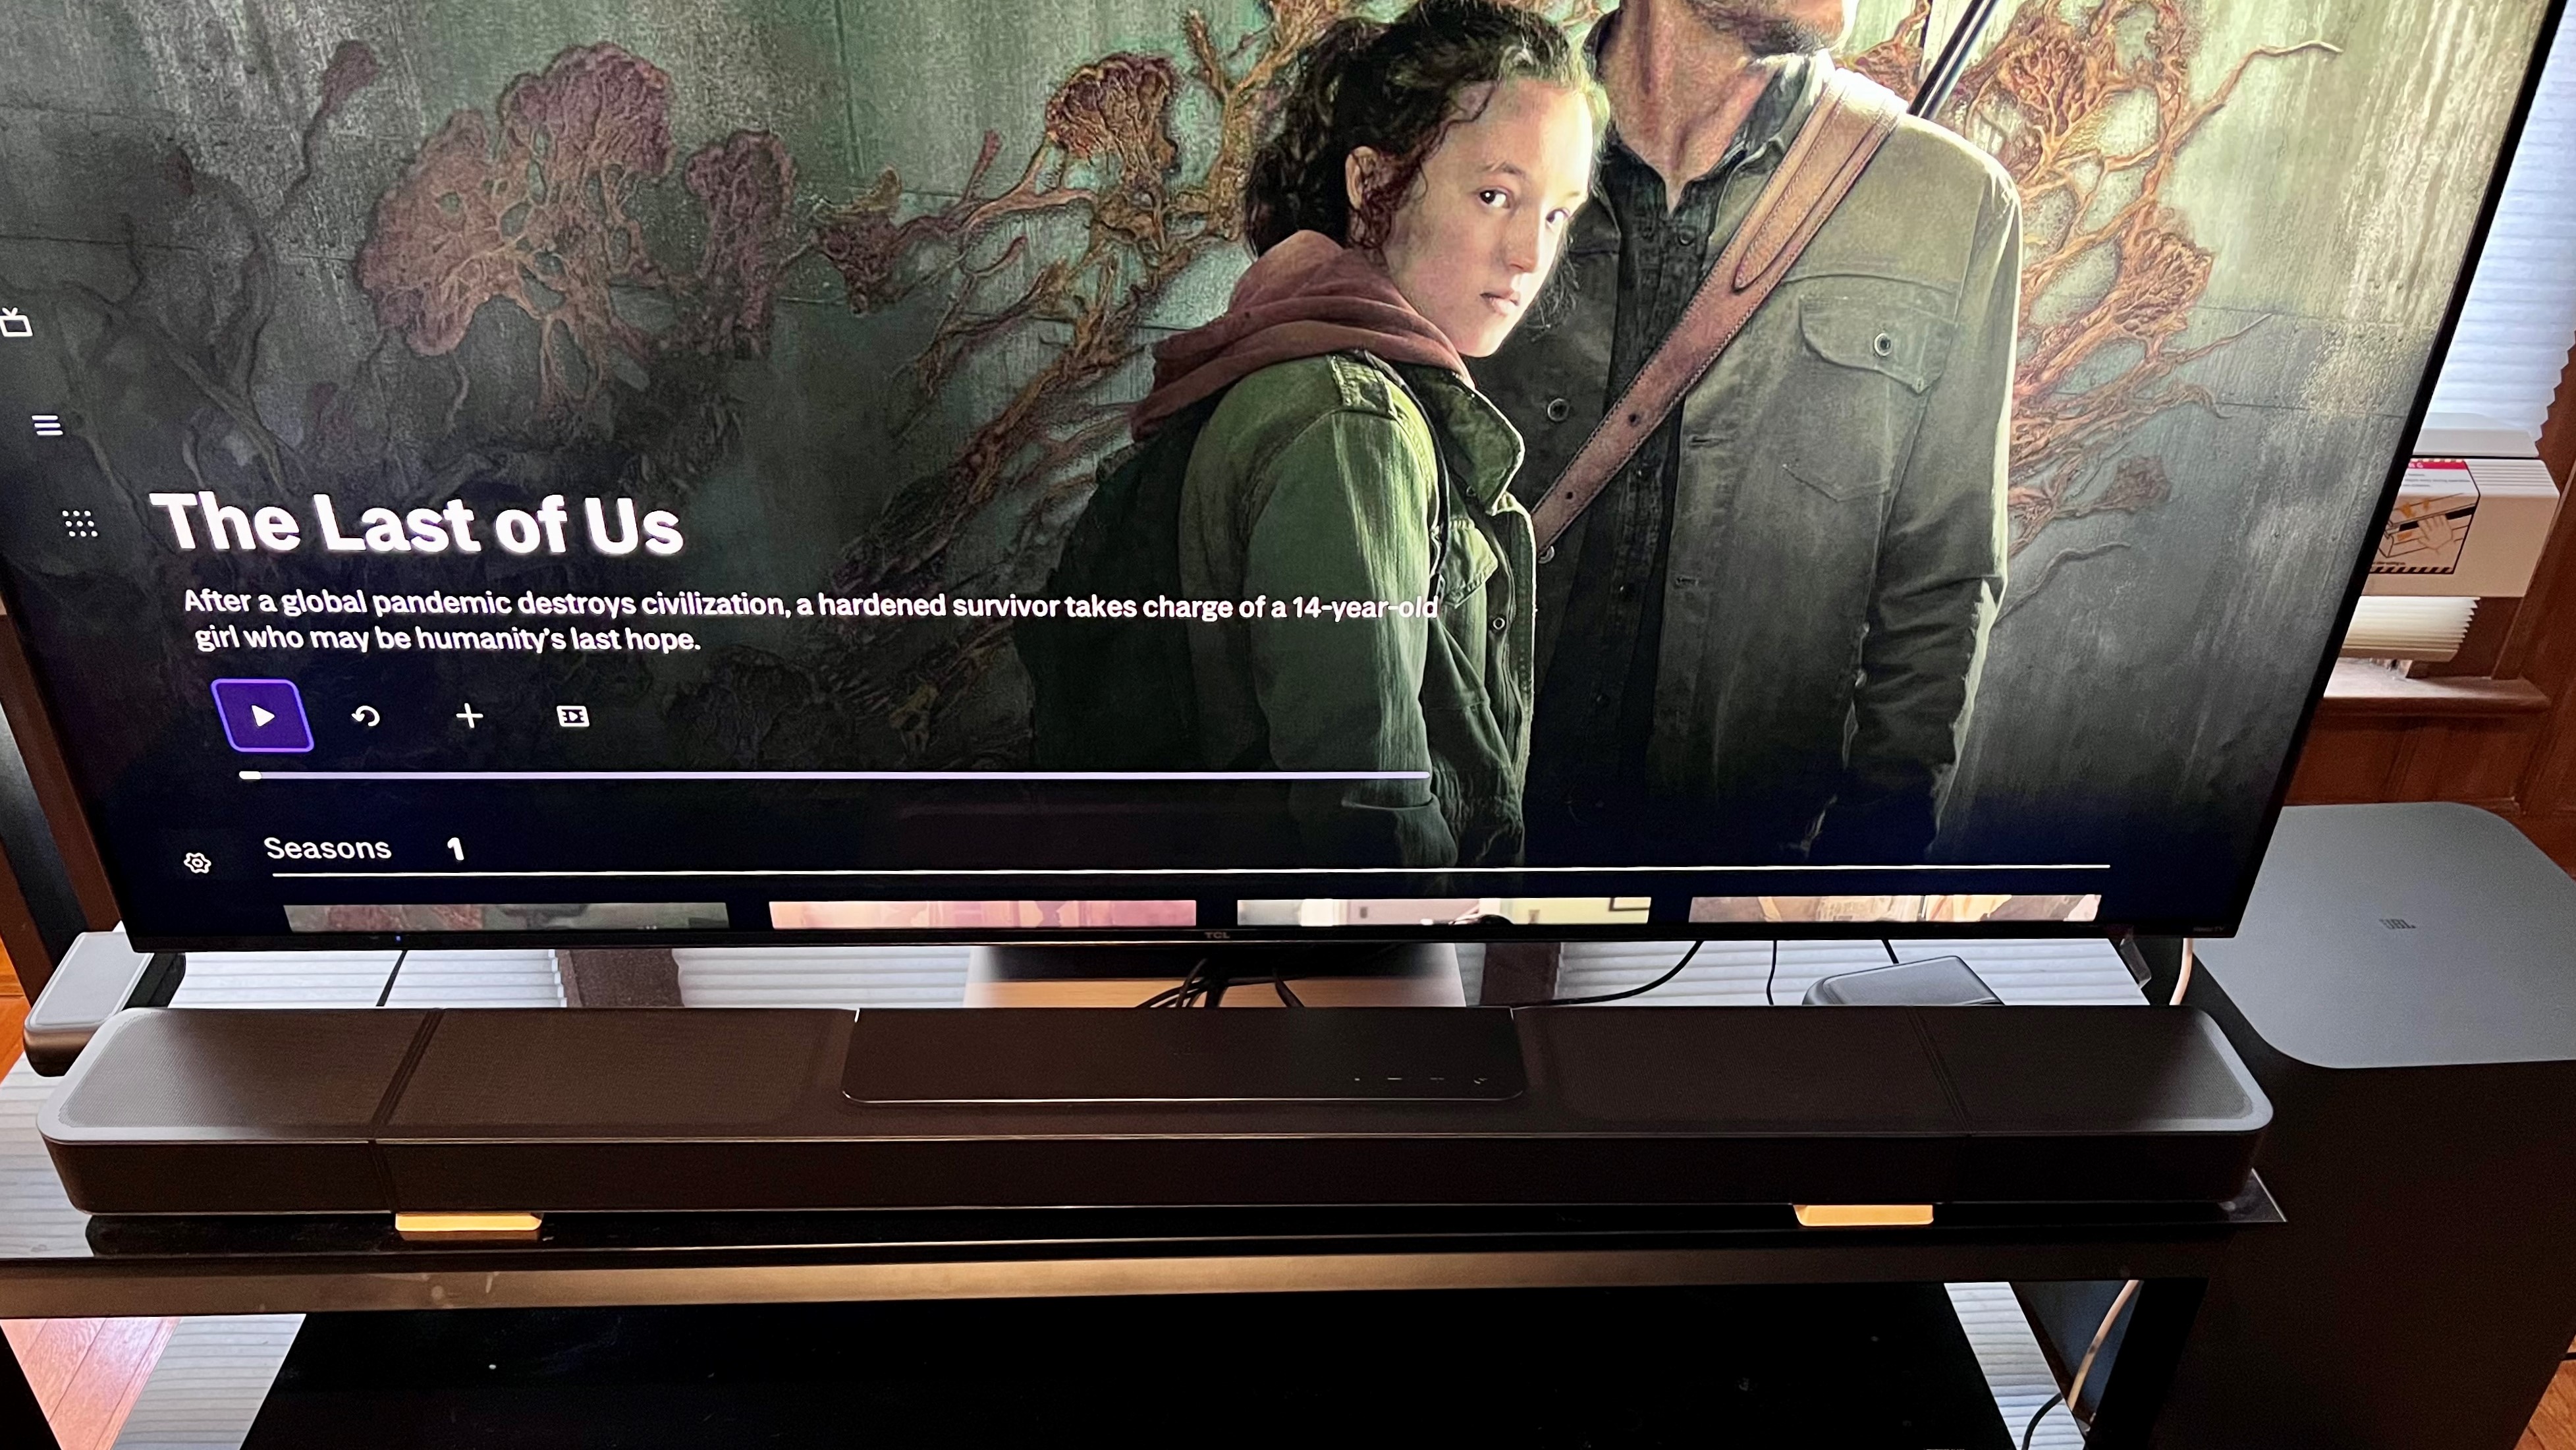 JBL 1300X soundbar on TV stand with TV showing the last of us